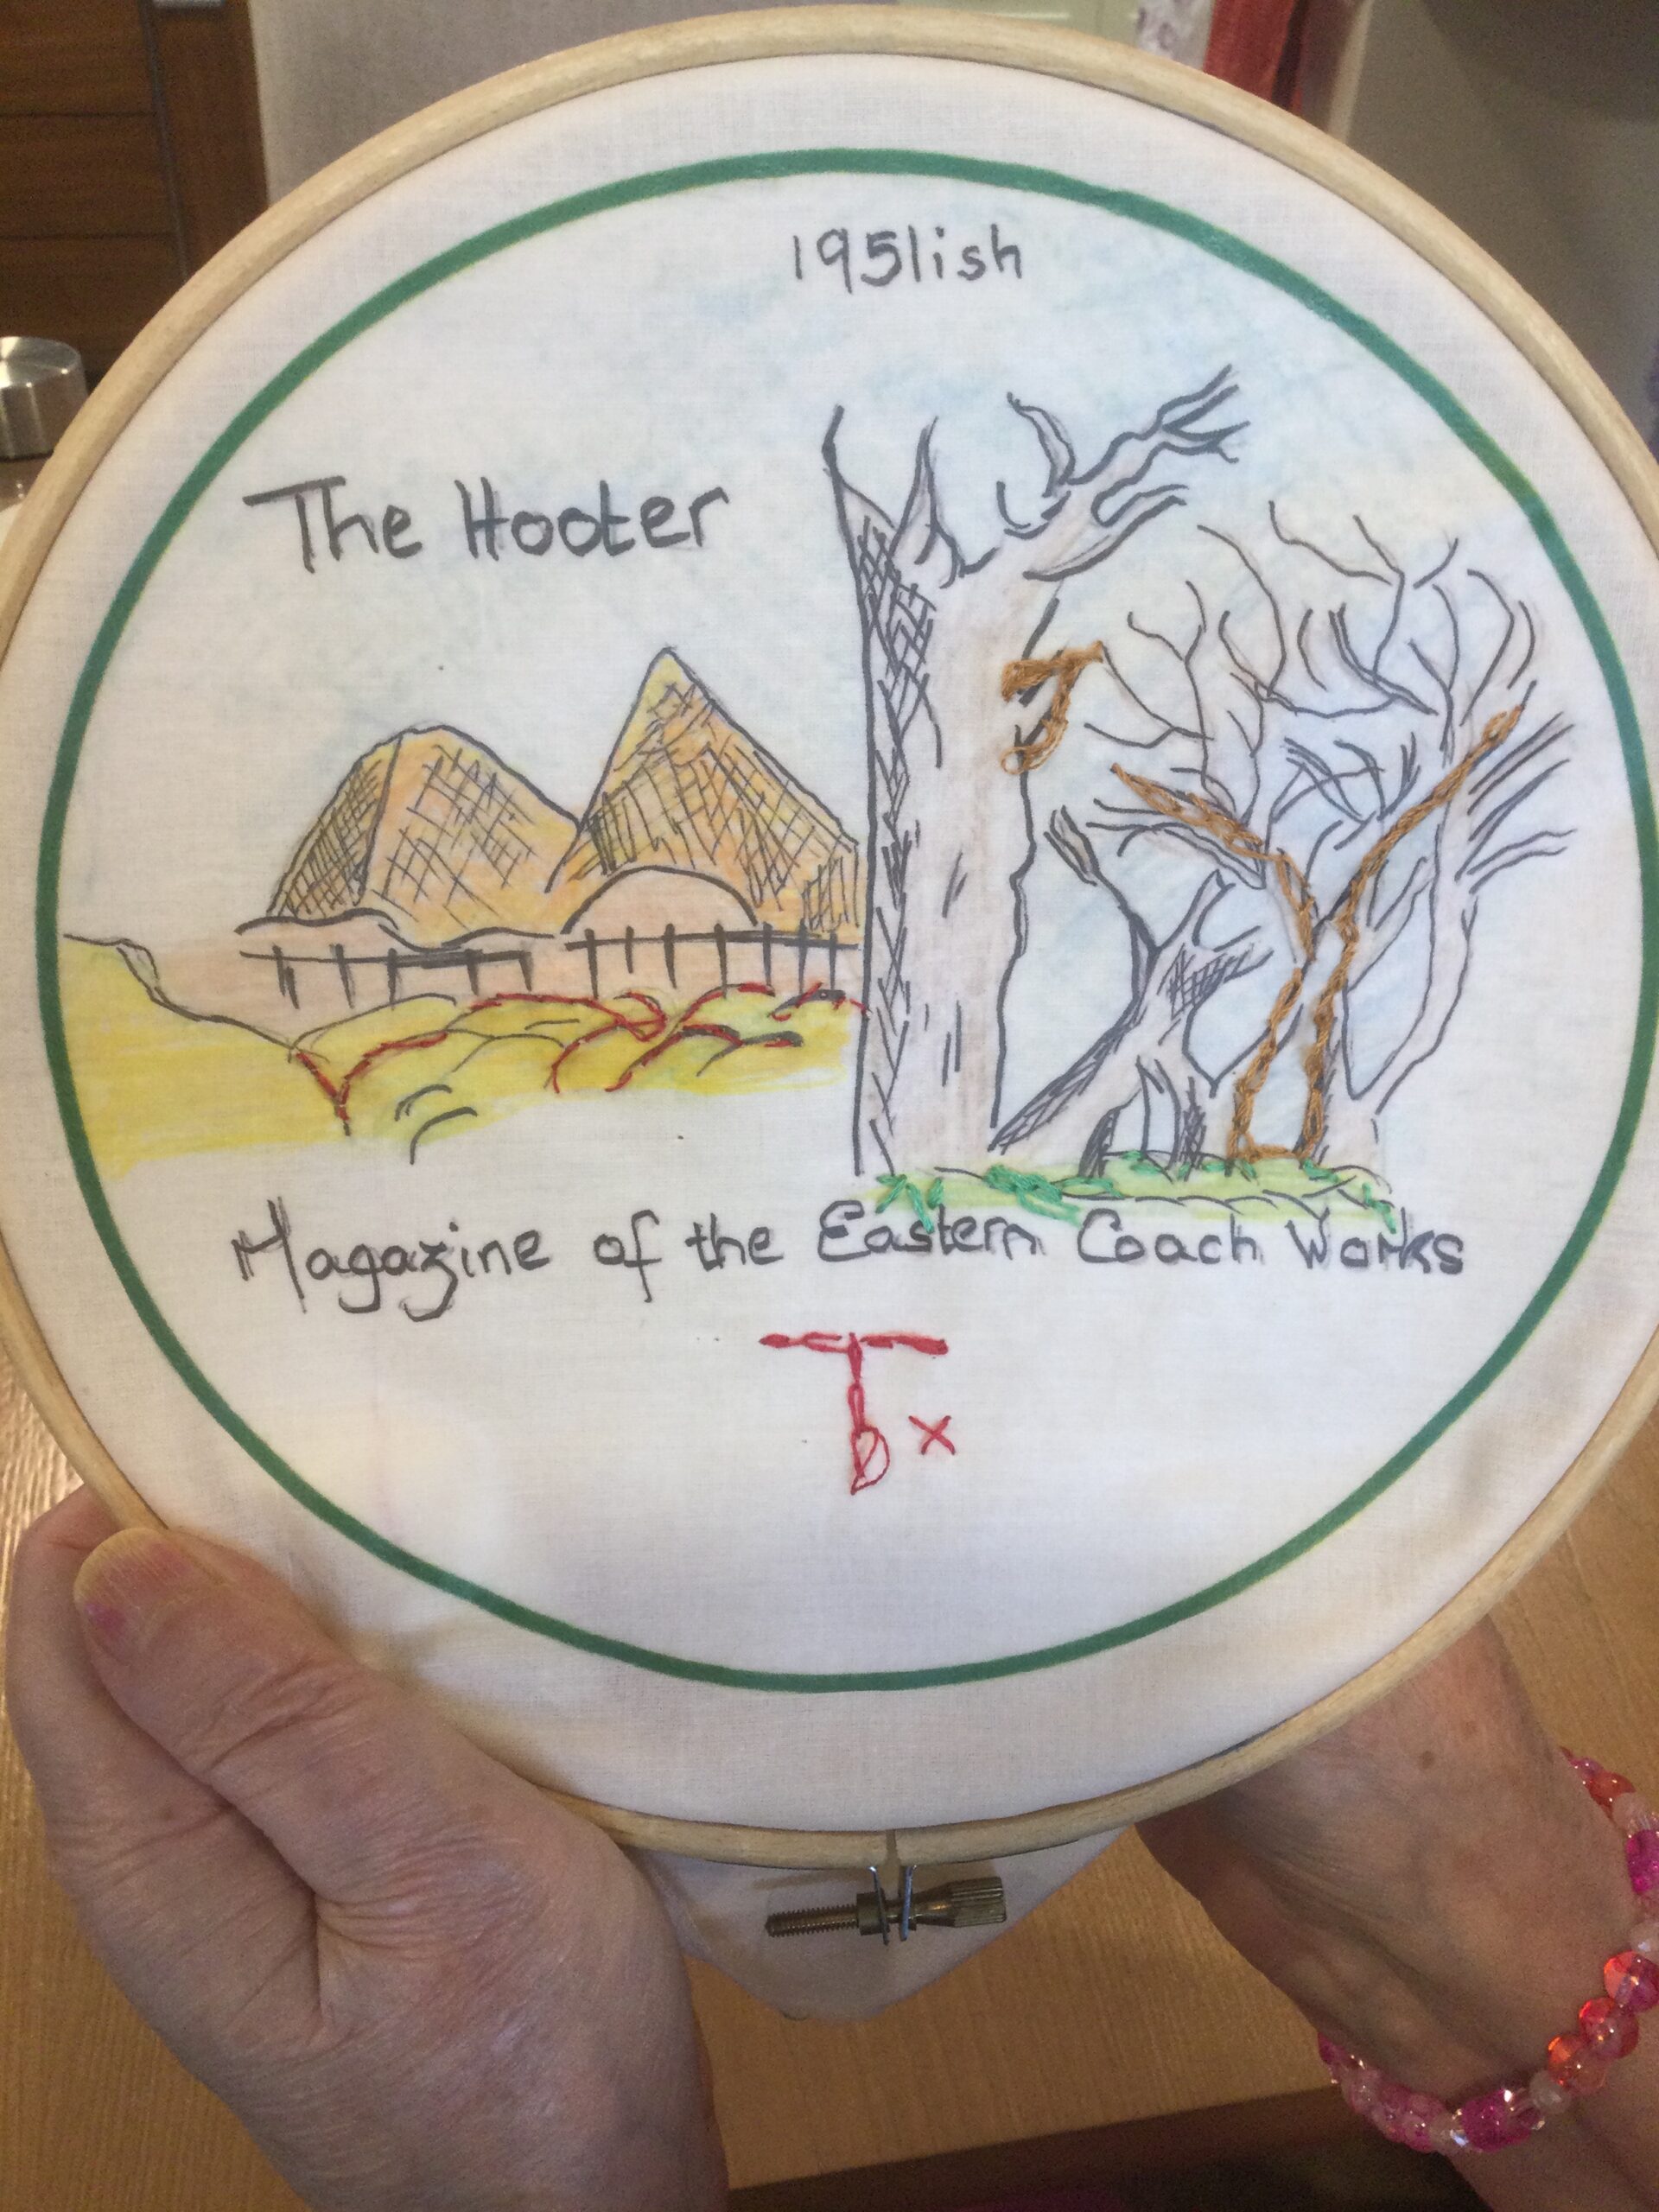 A piece of embroidery in a wooden hoop, showing the cover of the Hooter magazine